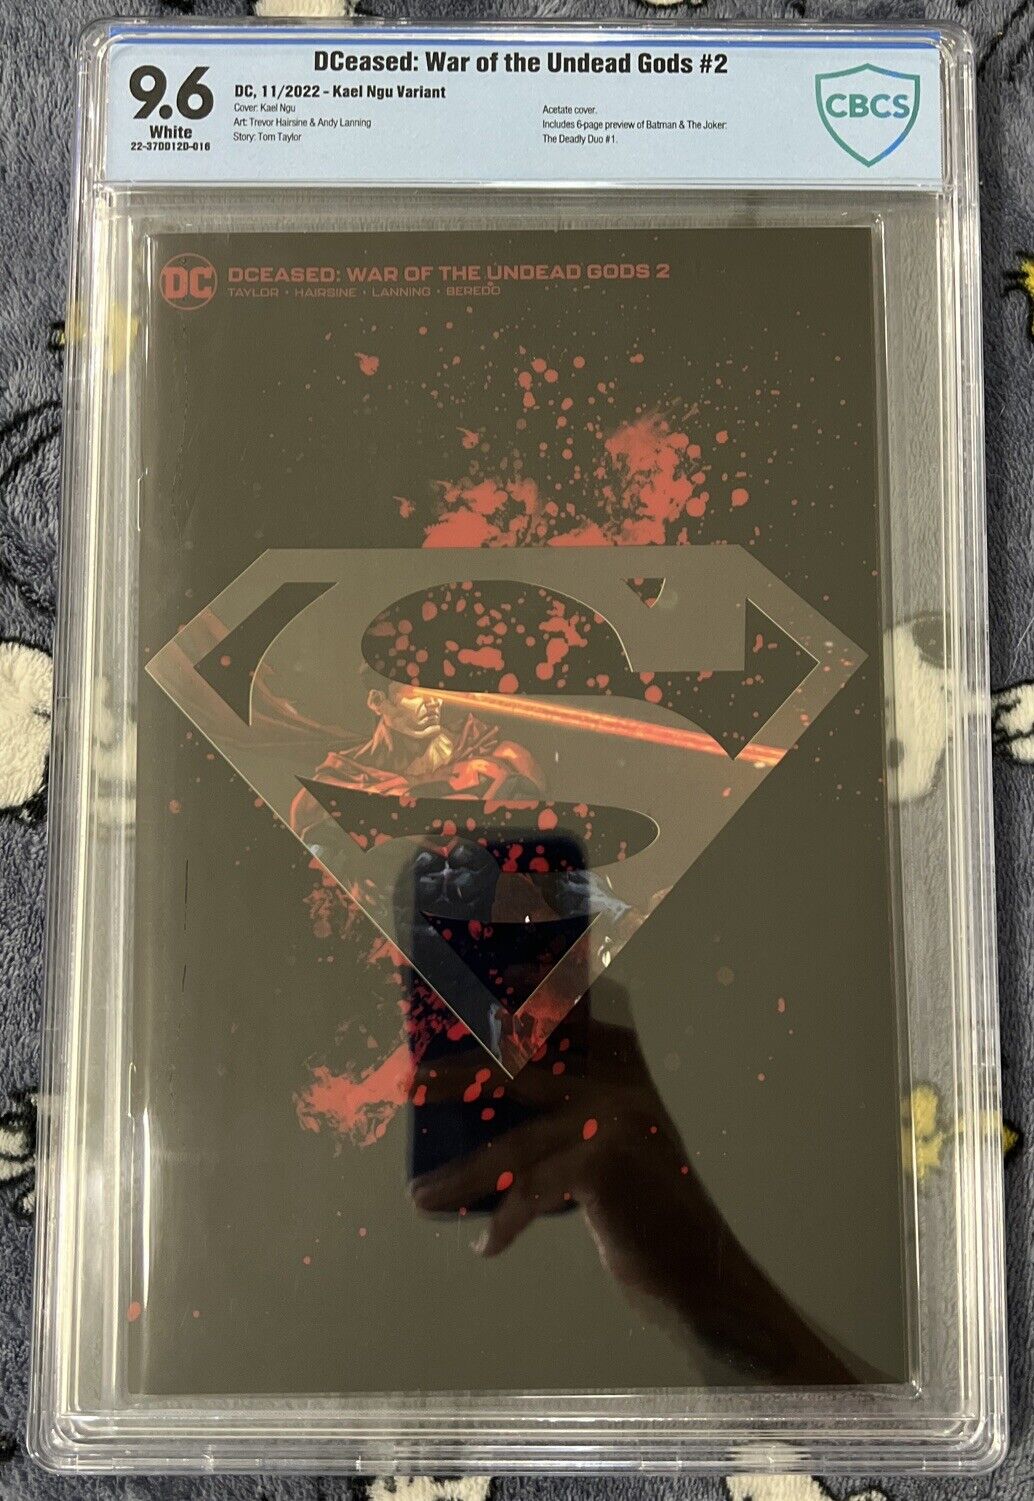 DCEASED: WAR OF THE UNDEAD GODS #2 CBCS 9.6 KAEL NGU VARIANT ACETATE COVER 2022